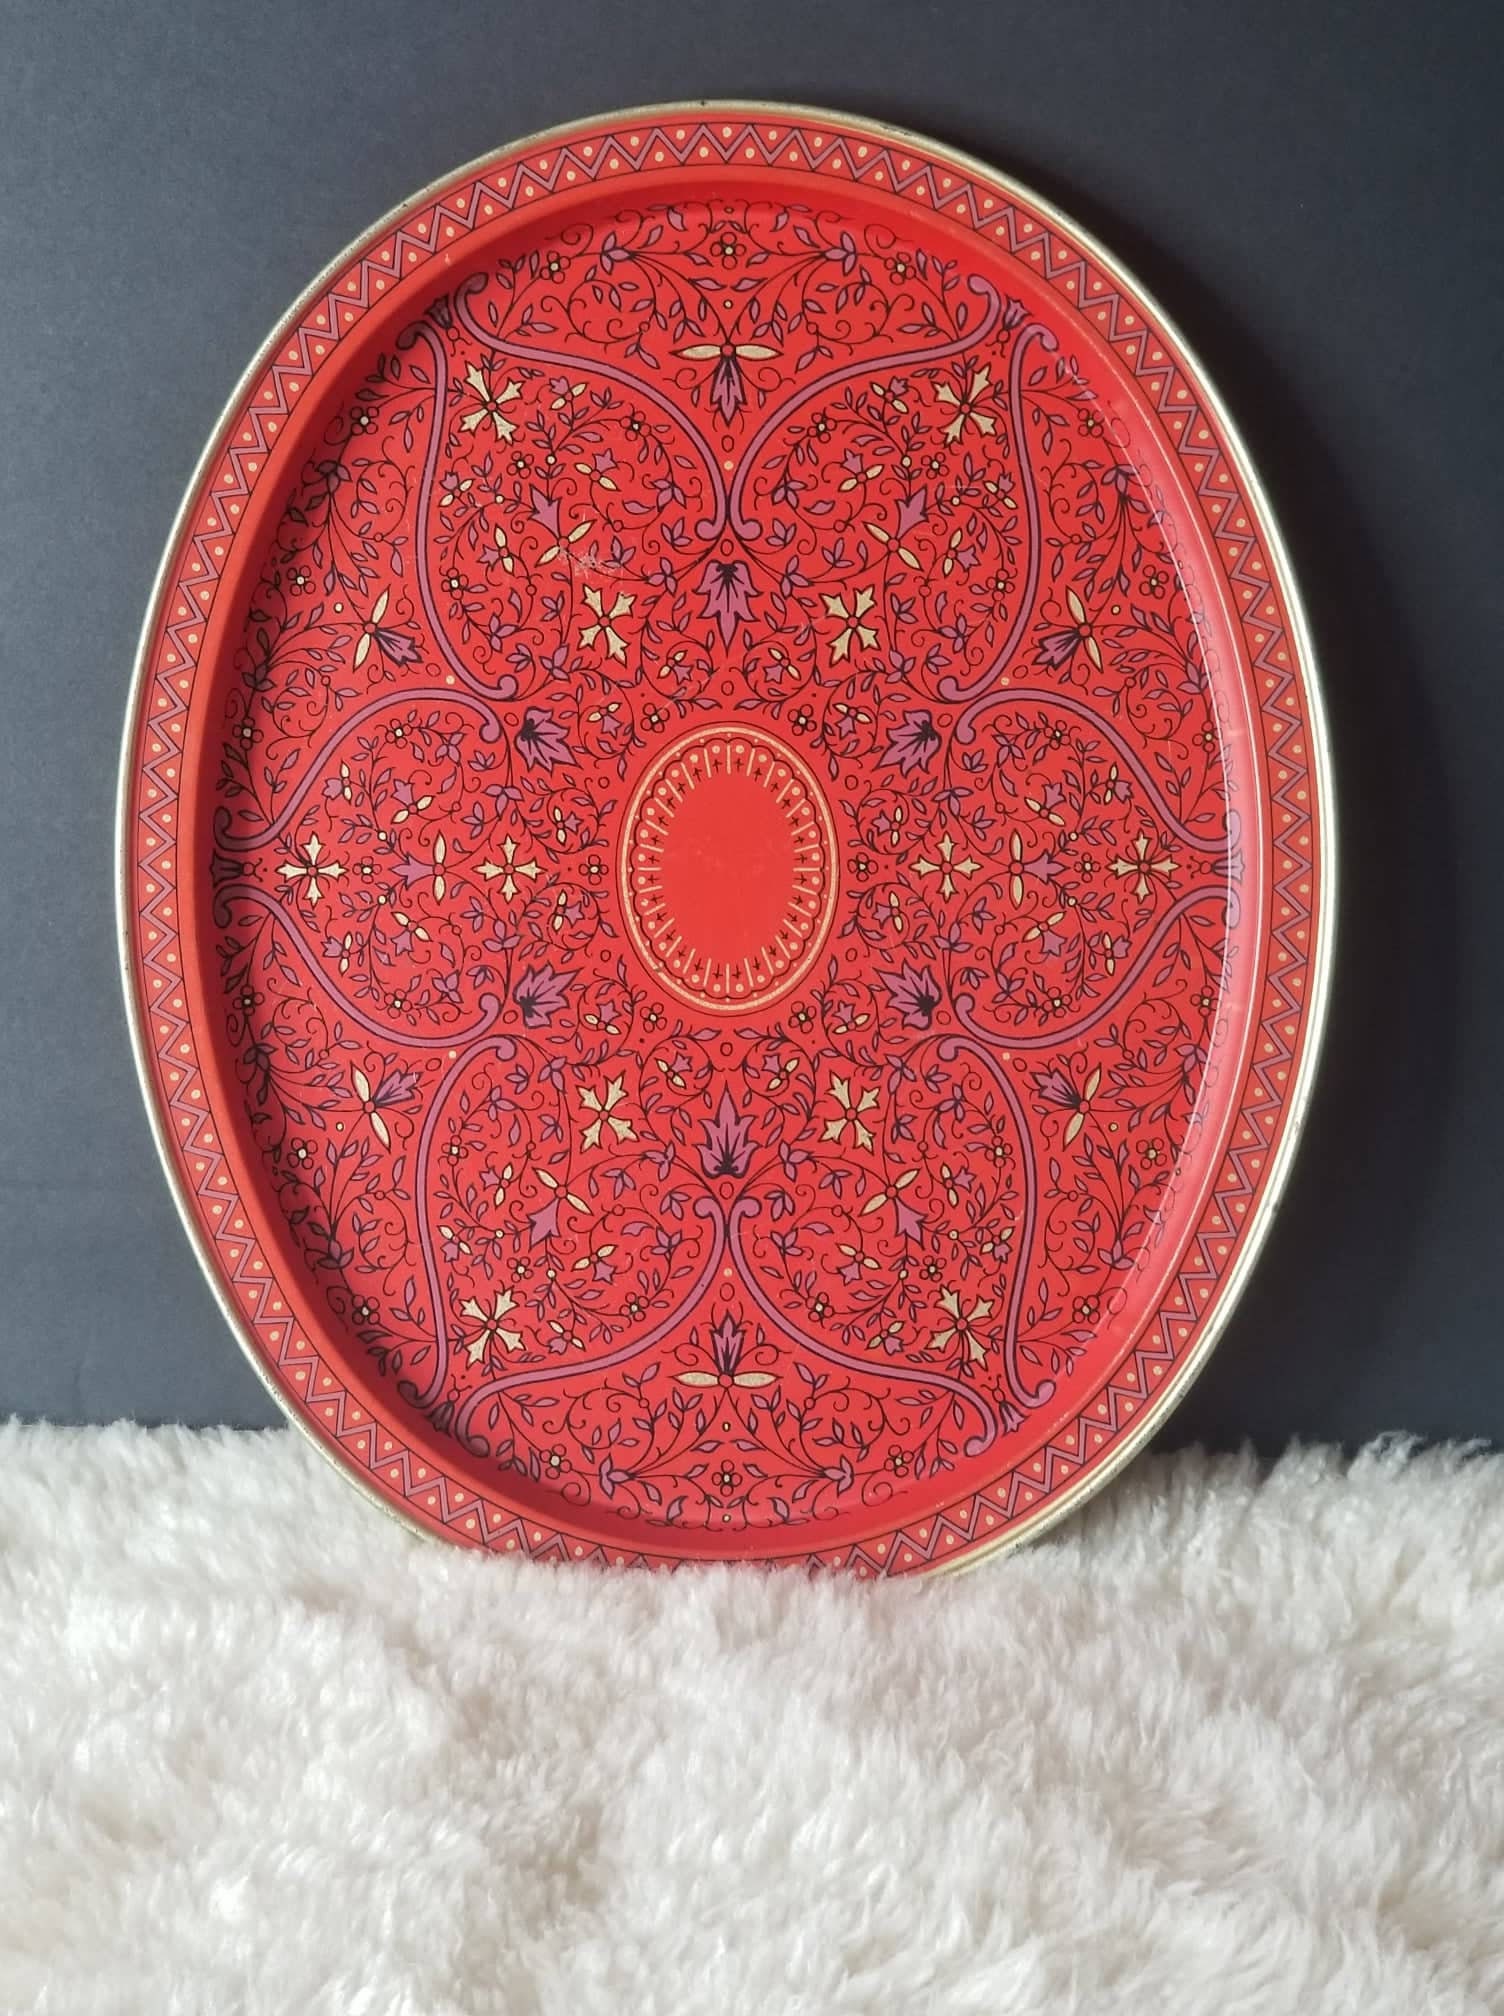 Vintage Fabcraft Oval Metal Serving Tray 1960s Red Oval Tray | Etsy